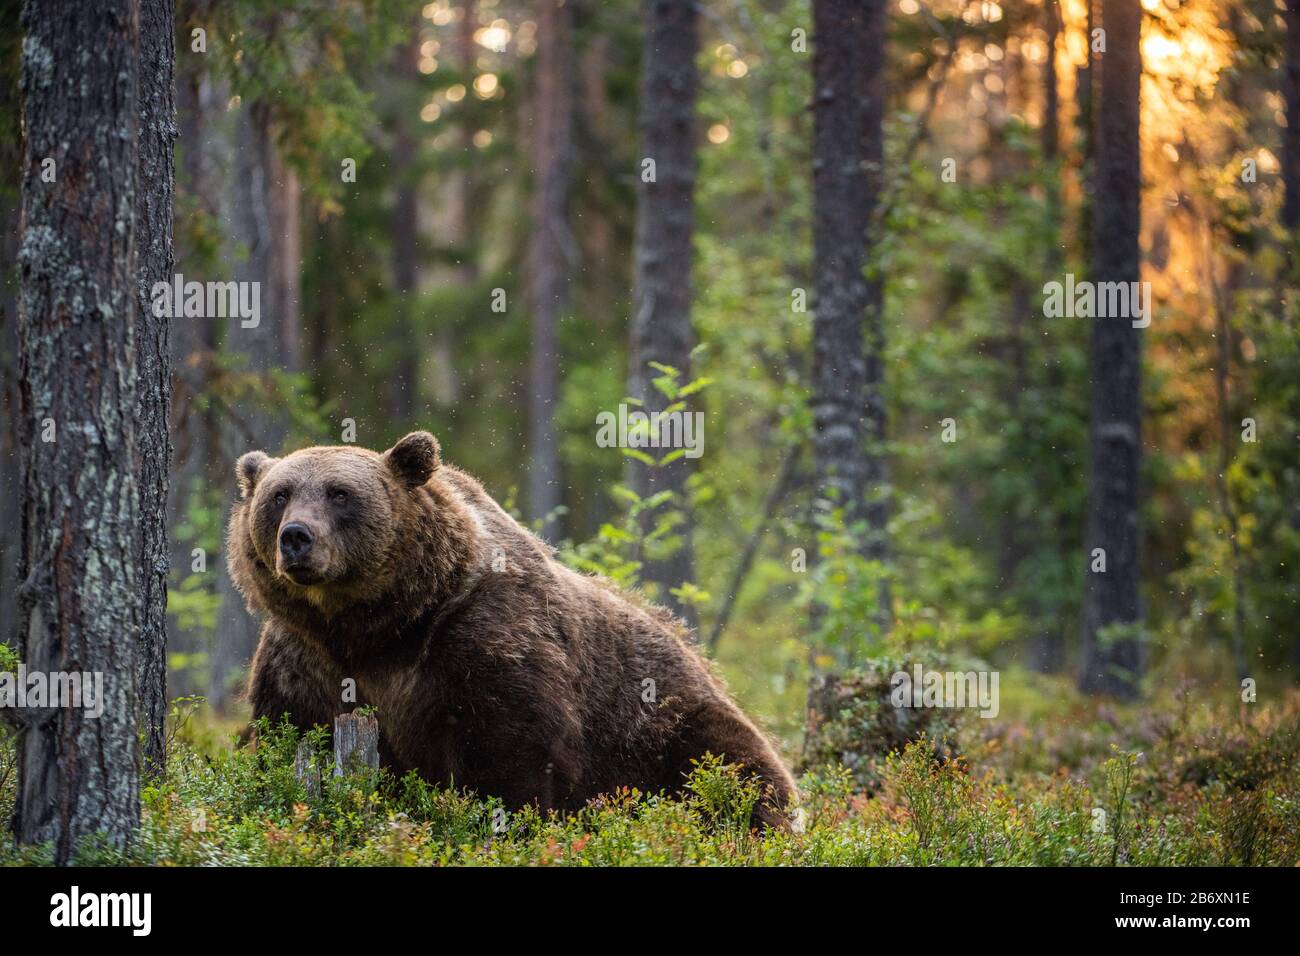 Big brown bear with backlit. Sunset forest in background. Adult Male of Brown bear in the summer forest. Scientific name: Ursus arctos. Natural habita Stock Photo